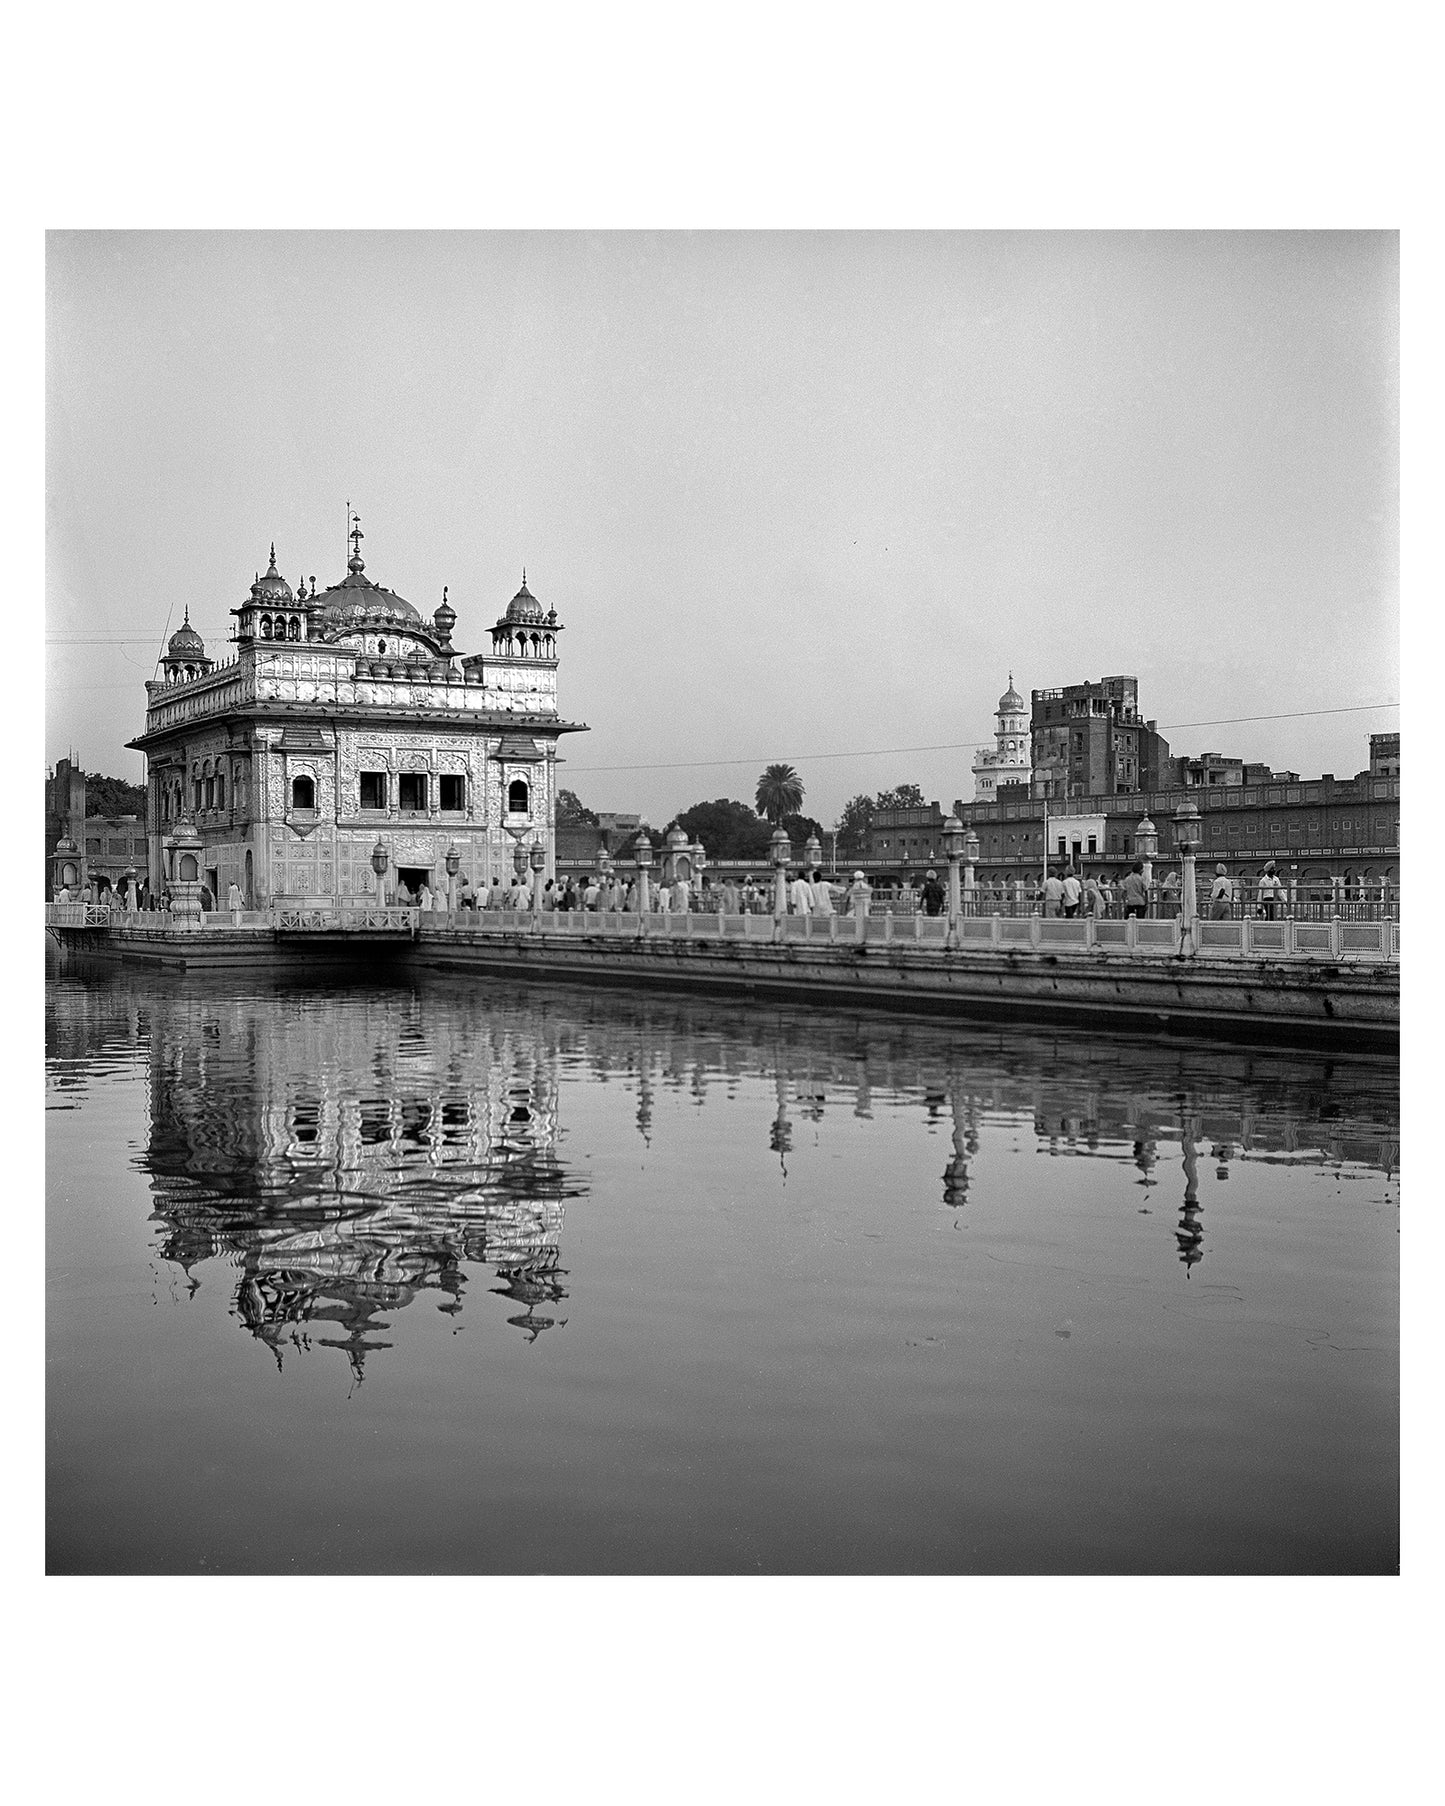 Sri Harmandir Sahib -Golden temple floating in water is a sight to behold